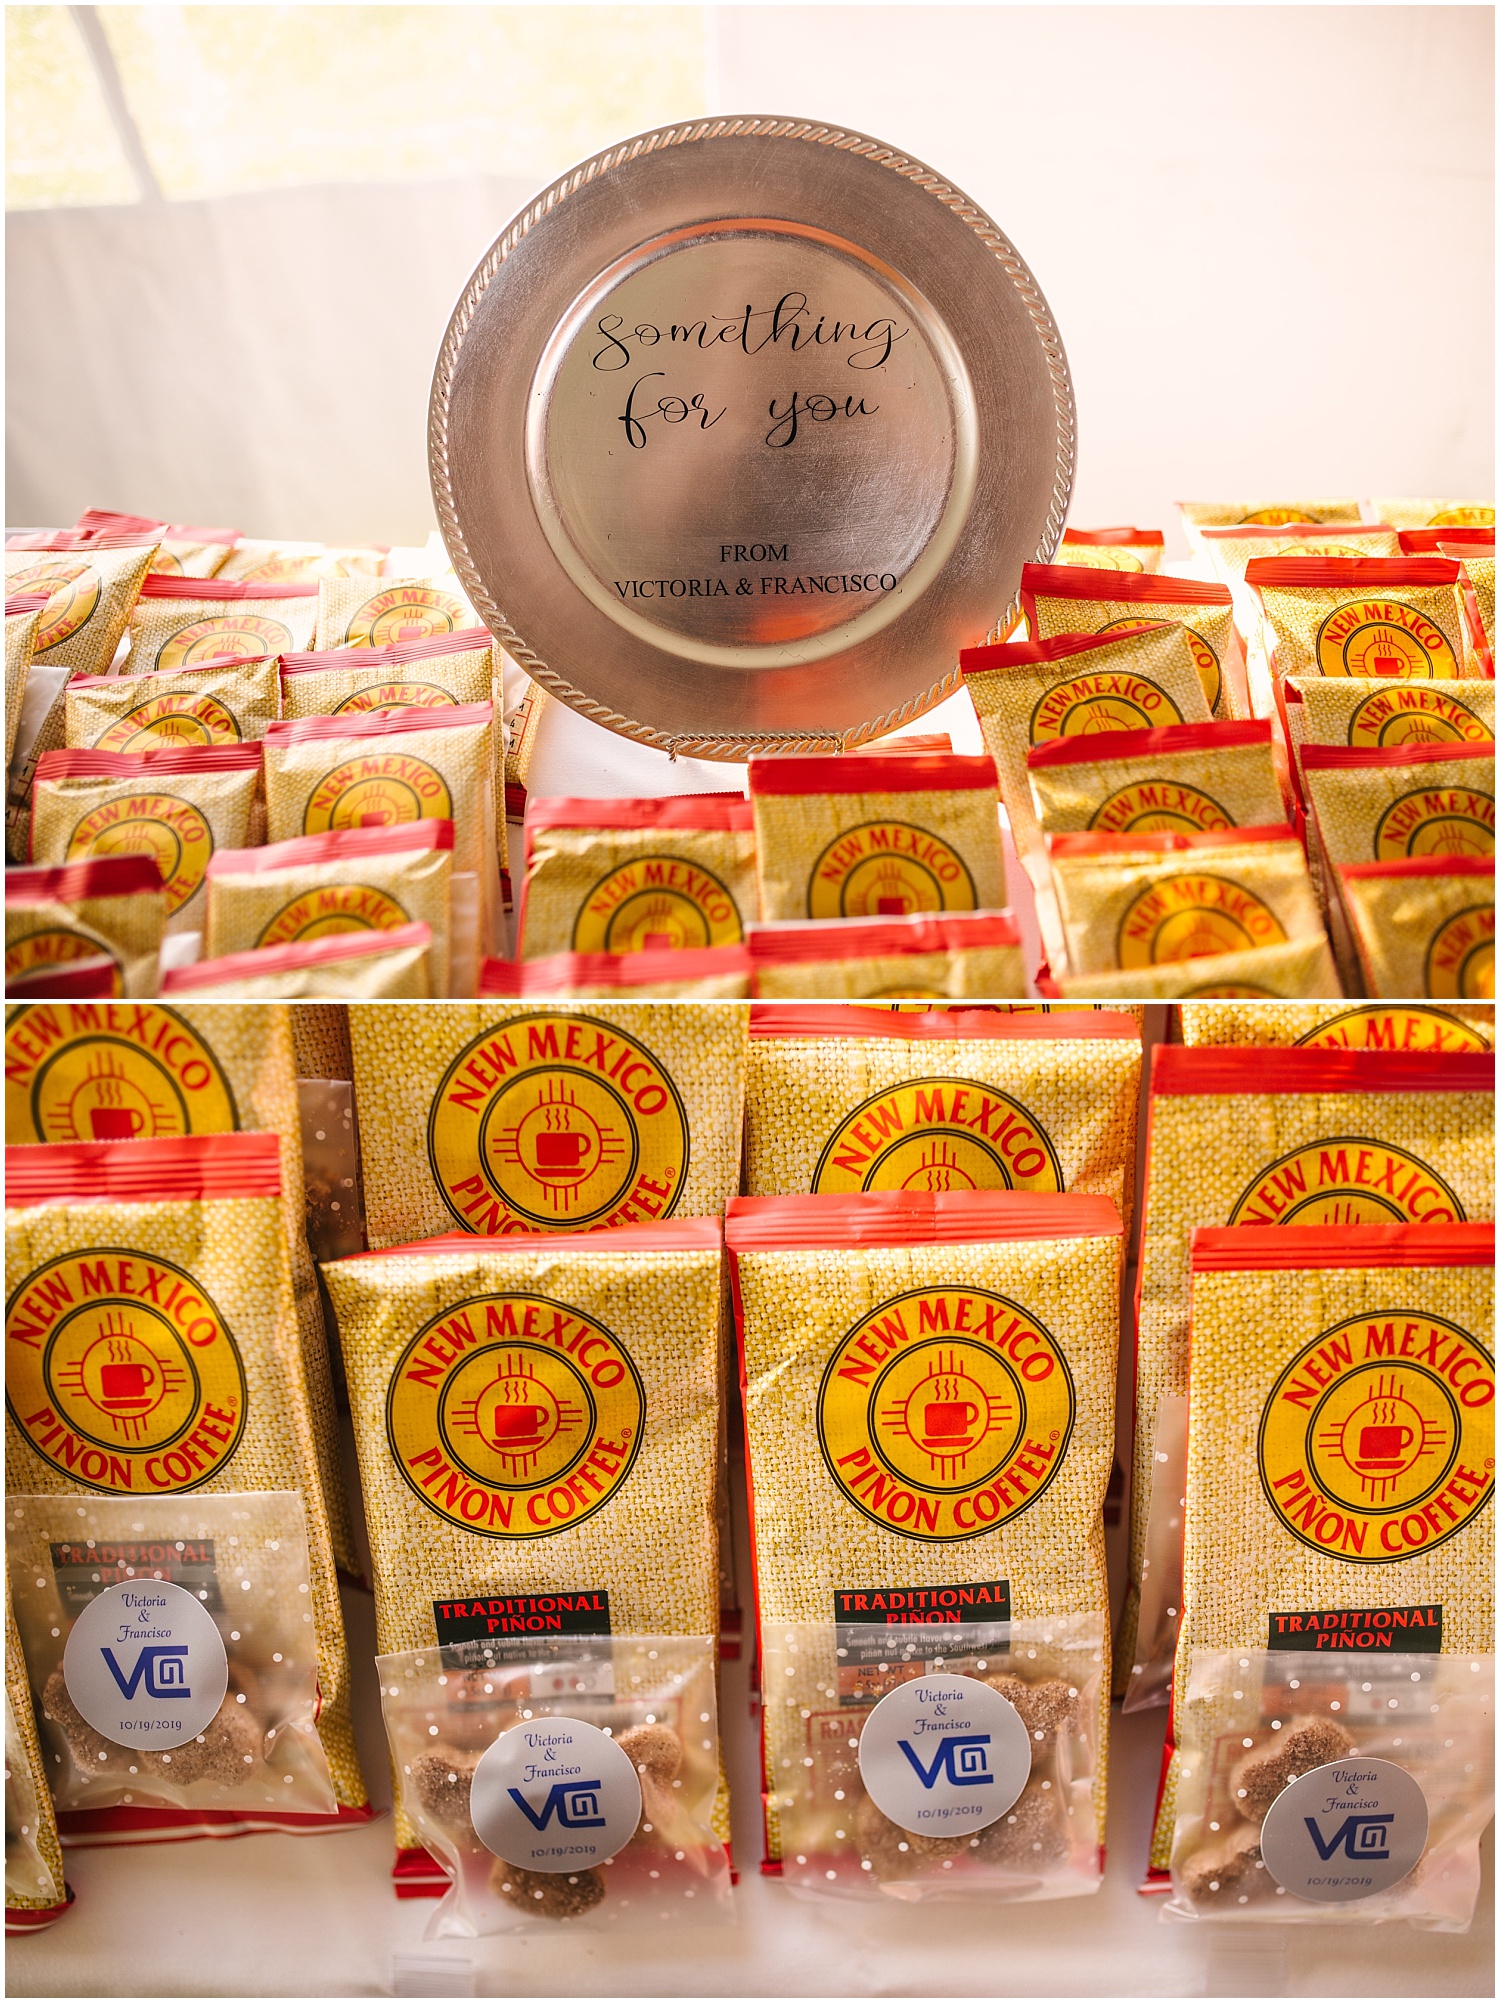 Classic New Mexico wedding with New Mexico Pinon Coffee and biscochito favors for all guests